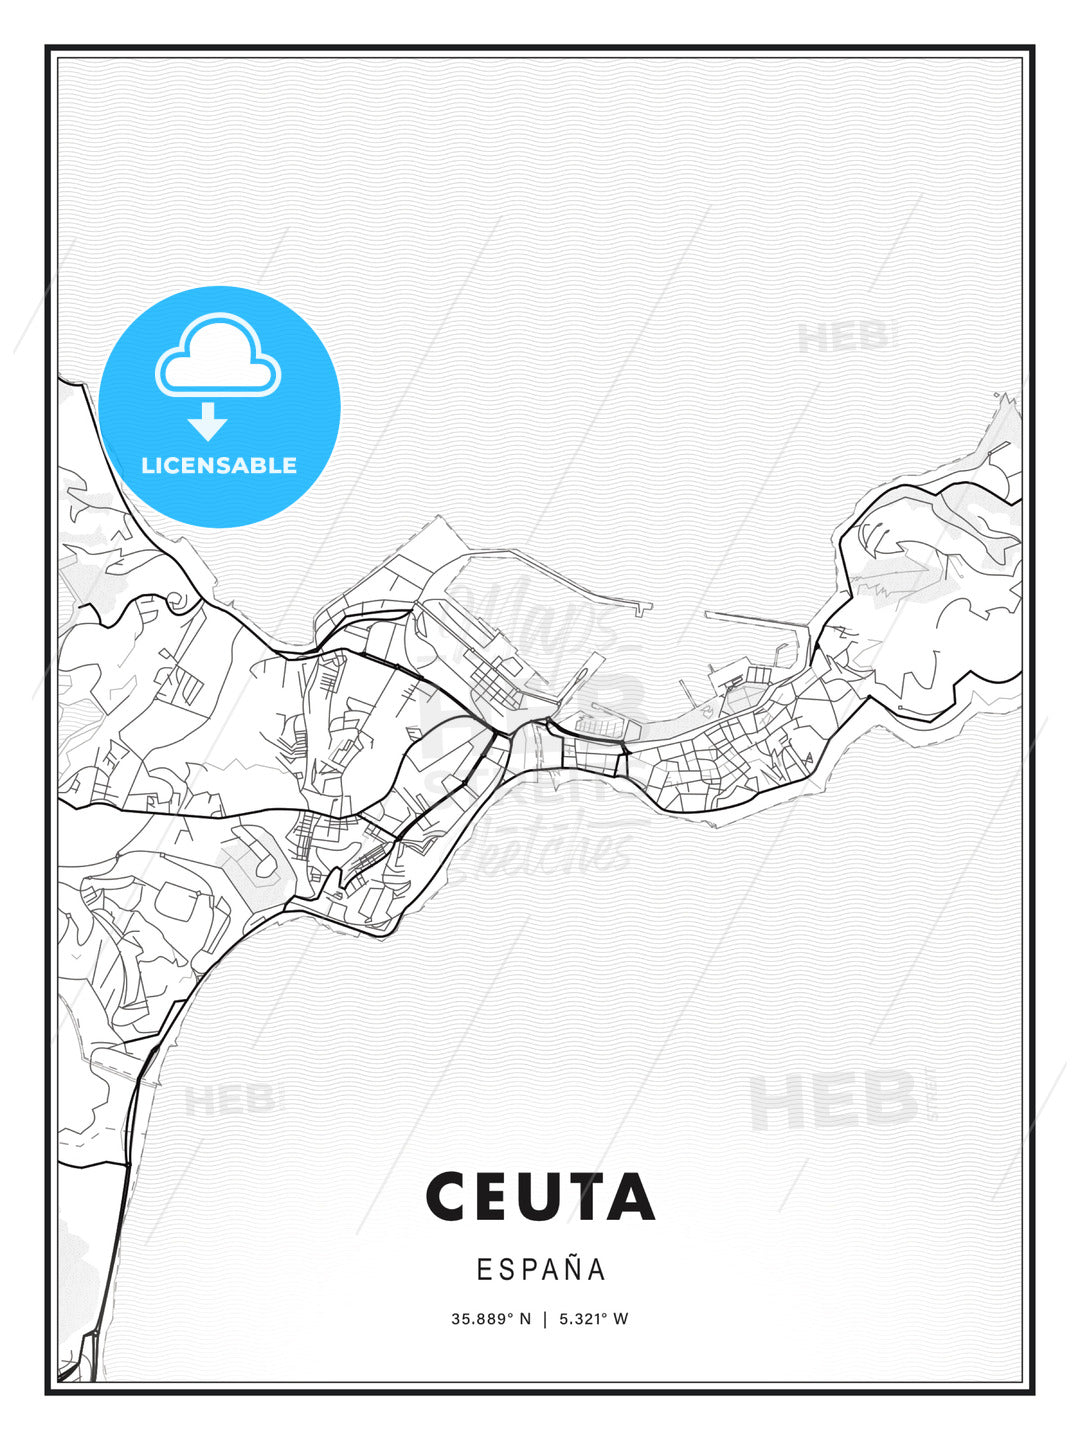 Ceuta, Spain, Modern Print Template in Various Formats - HEBSTREITS Sketches